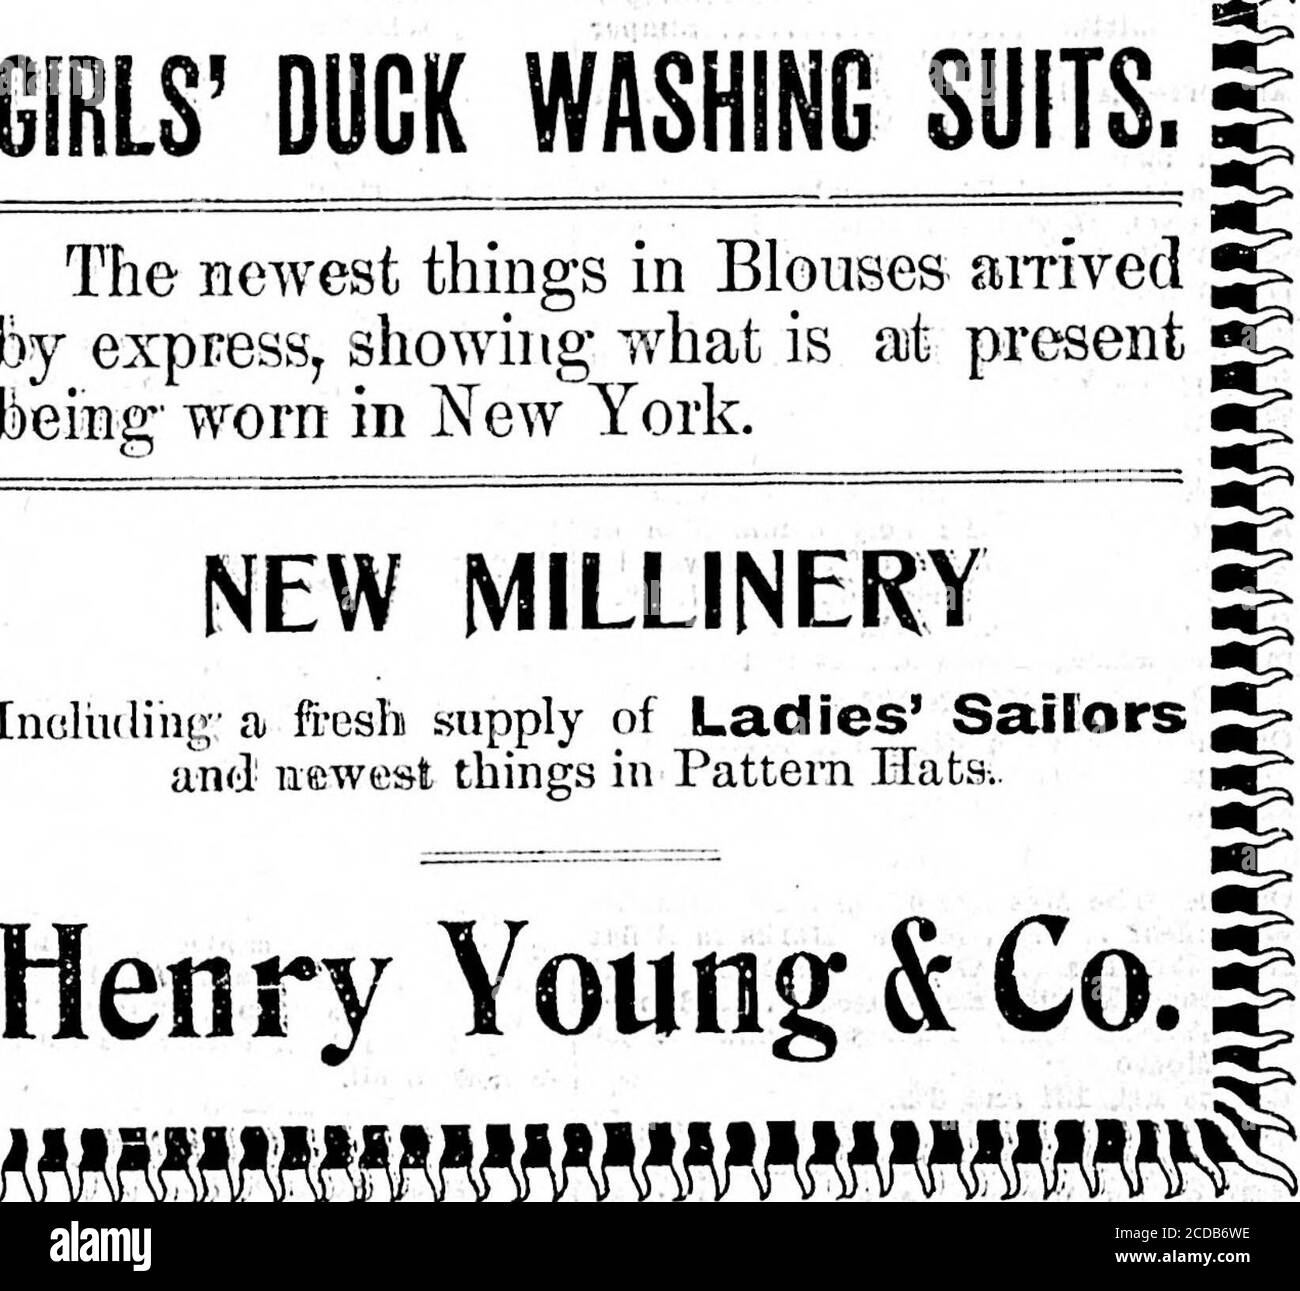 . Daily Colonist (1900-04-15) . SHOWING THIS WEEK^ IN DUCK AND DENIM, GIRLS DOCK WASHING SUITS. The newest things in Blouses arrivedby express, showing what is at presentfeeing worn in New York. NEW MILLINERY Including; a fresh supply of Ladies Sailors and newest things in Pattern Hats. mmmm. Tenuis Players! Your Ear. ** * ],&. haw Jast received our 1000- stockV of Teanis goods, including Wright& Ditsons Championship Balls; Pim.Larned,. and. other well known.Racquets TEMtS POLES, NETS, ETC.. 4&gt; t Wit W- Waitt Ca^Gover^eStSt. I SEARCH mfR A SON. Tlie Lad Deserted His Home in NewXork Four Sat Stock Photo